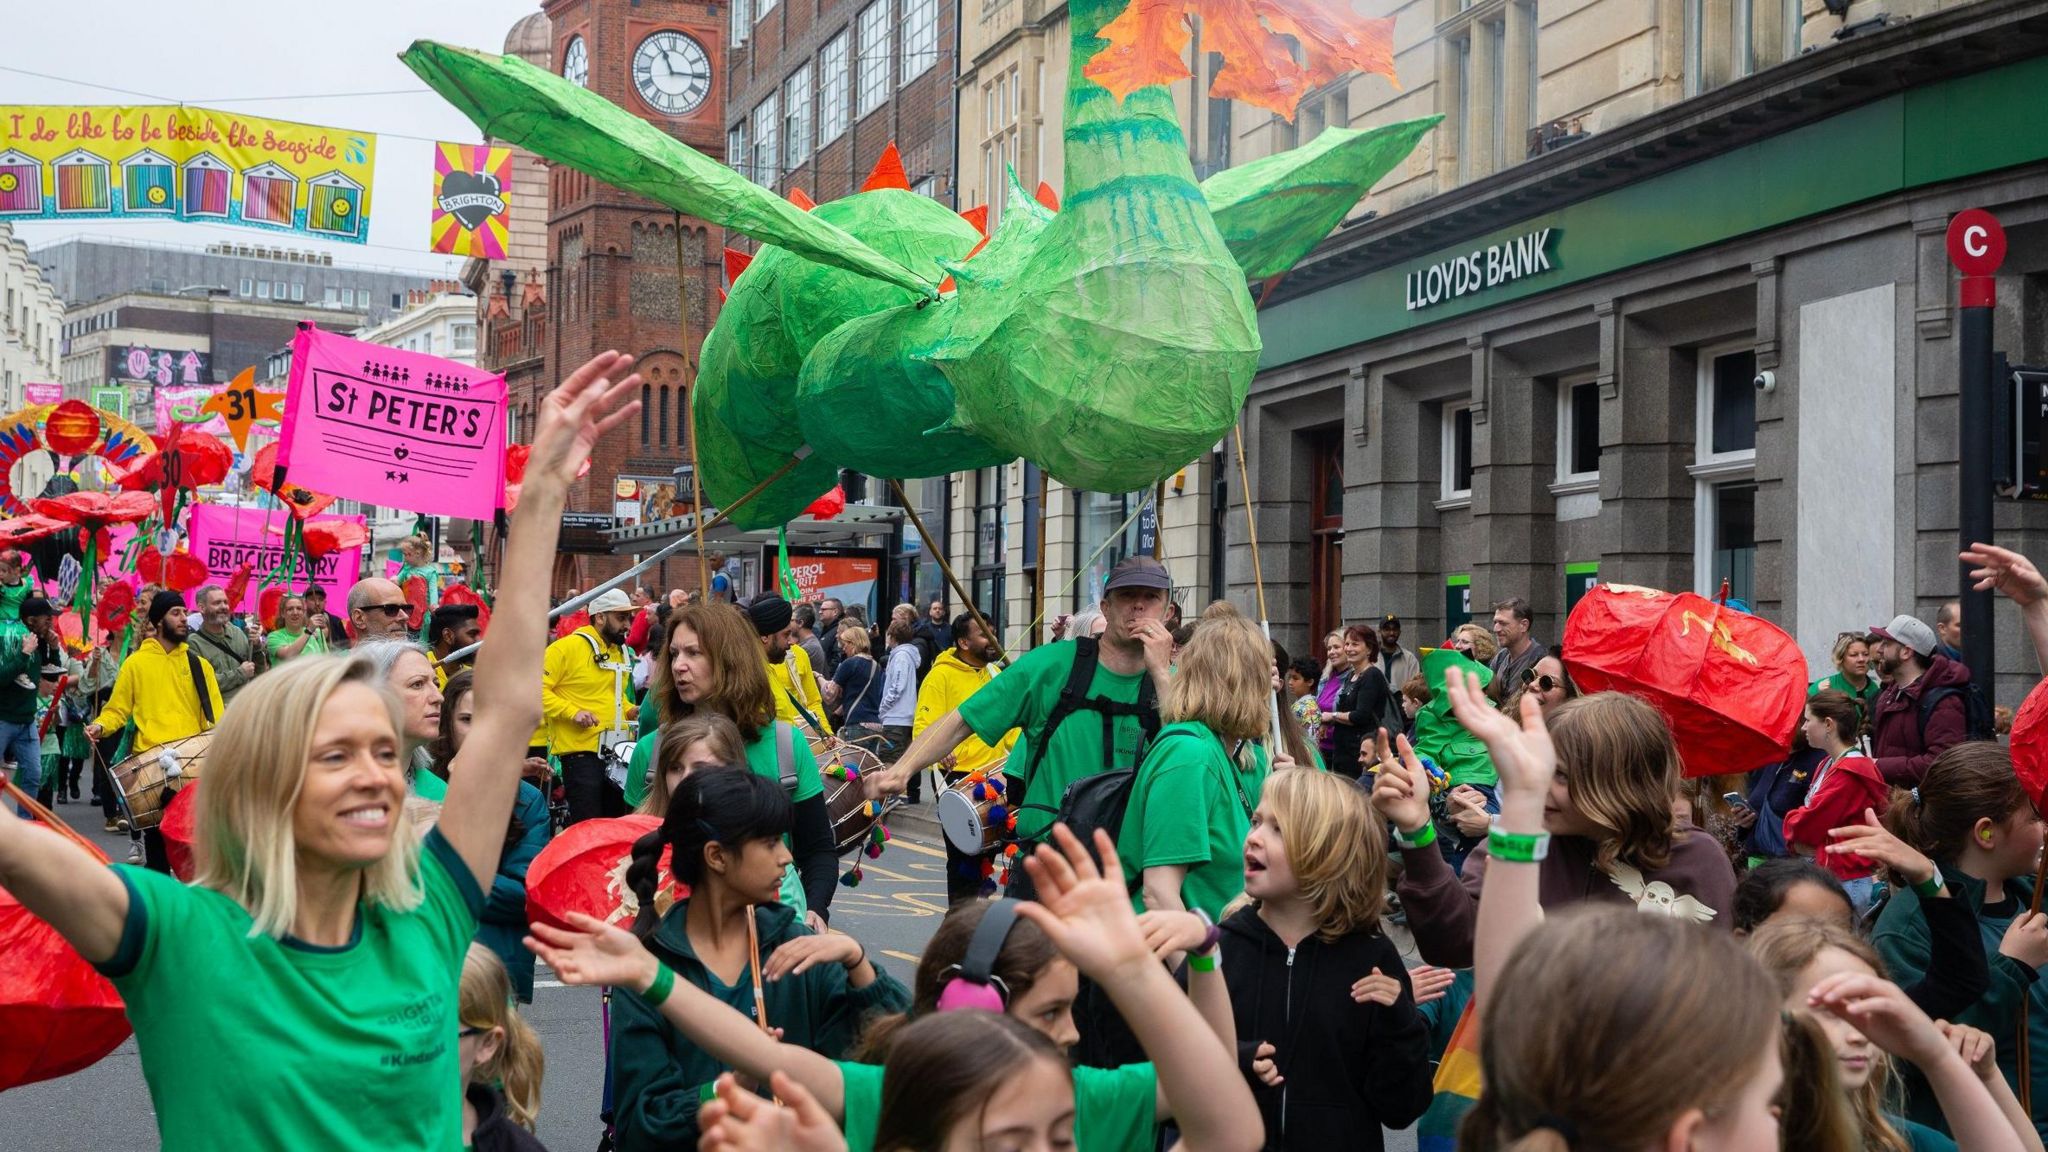 A colourful parade through the streets of Brighton with a paper dragon being held in the air